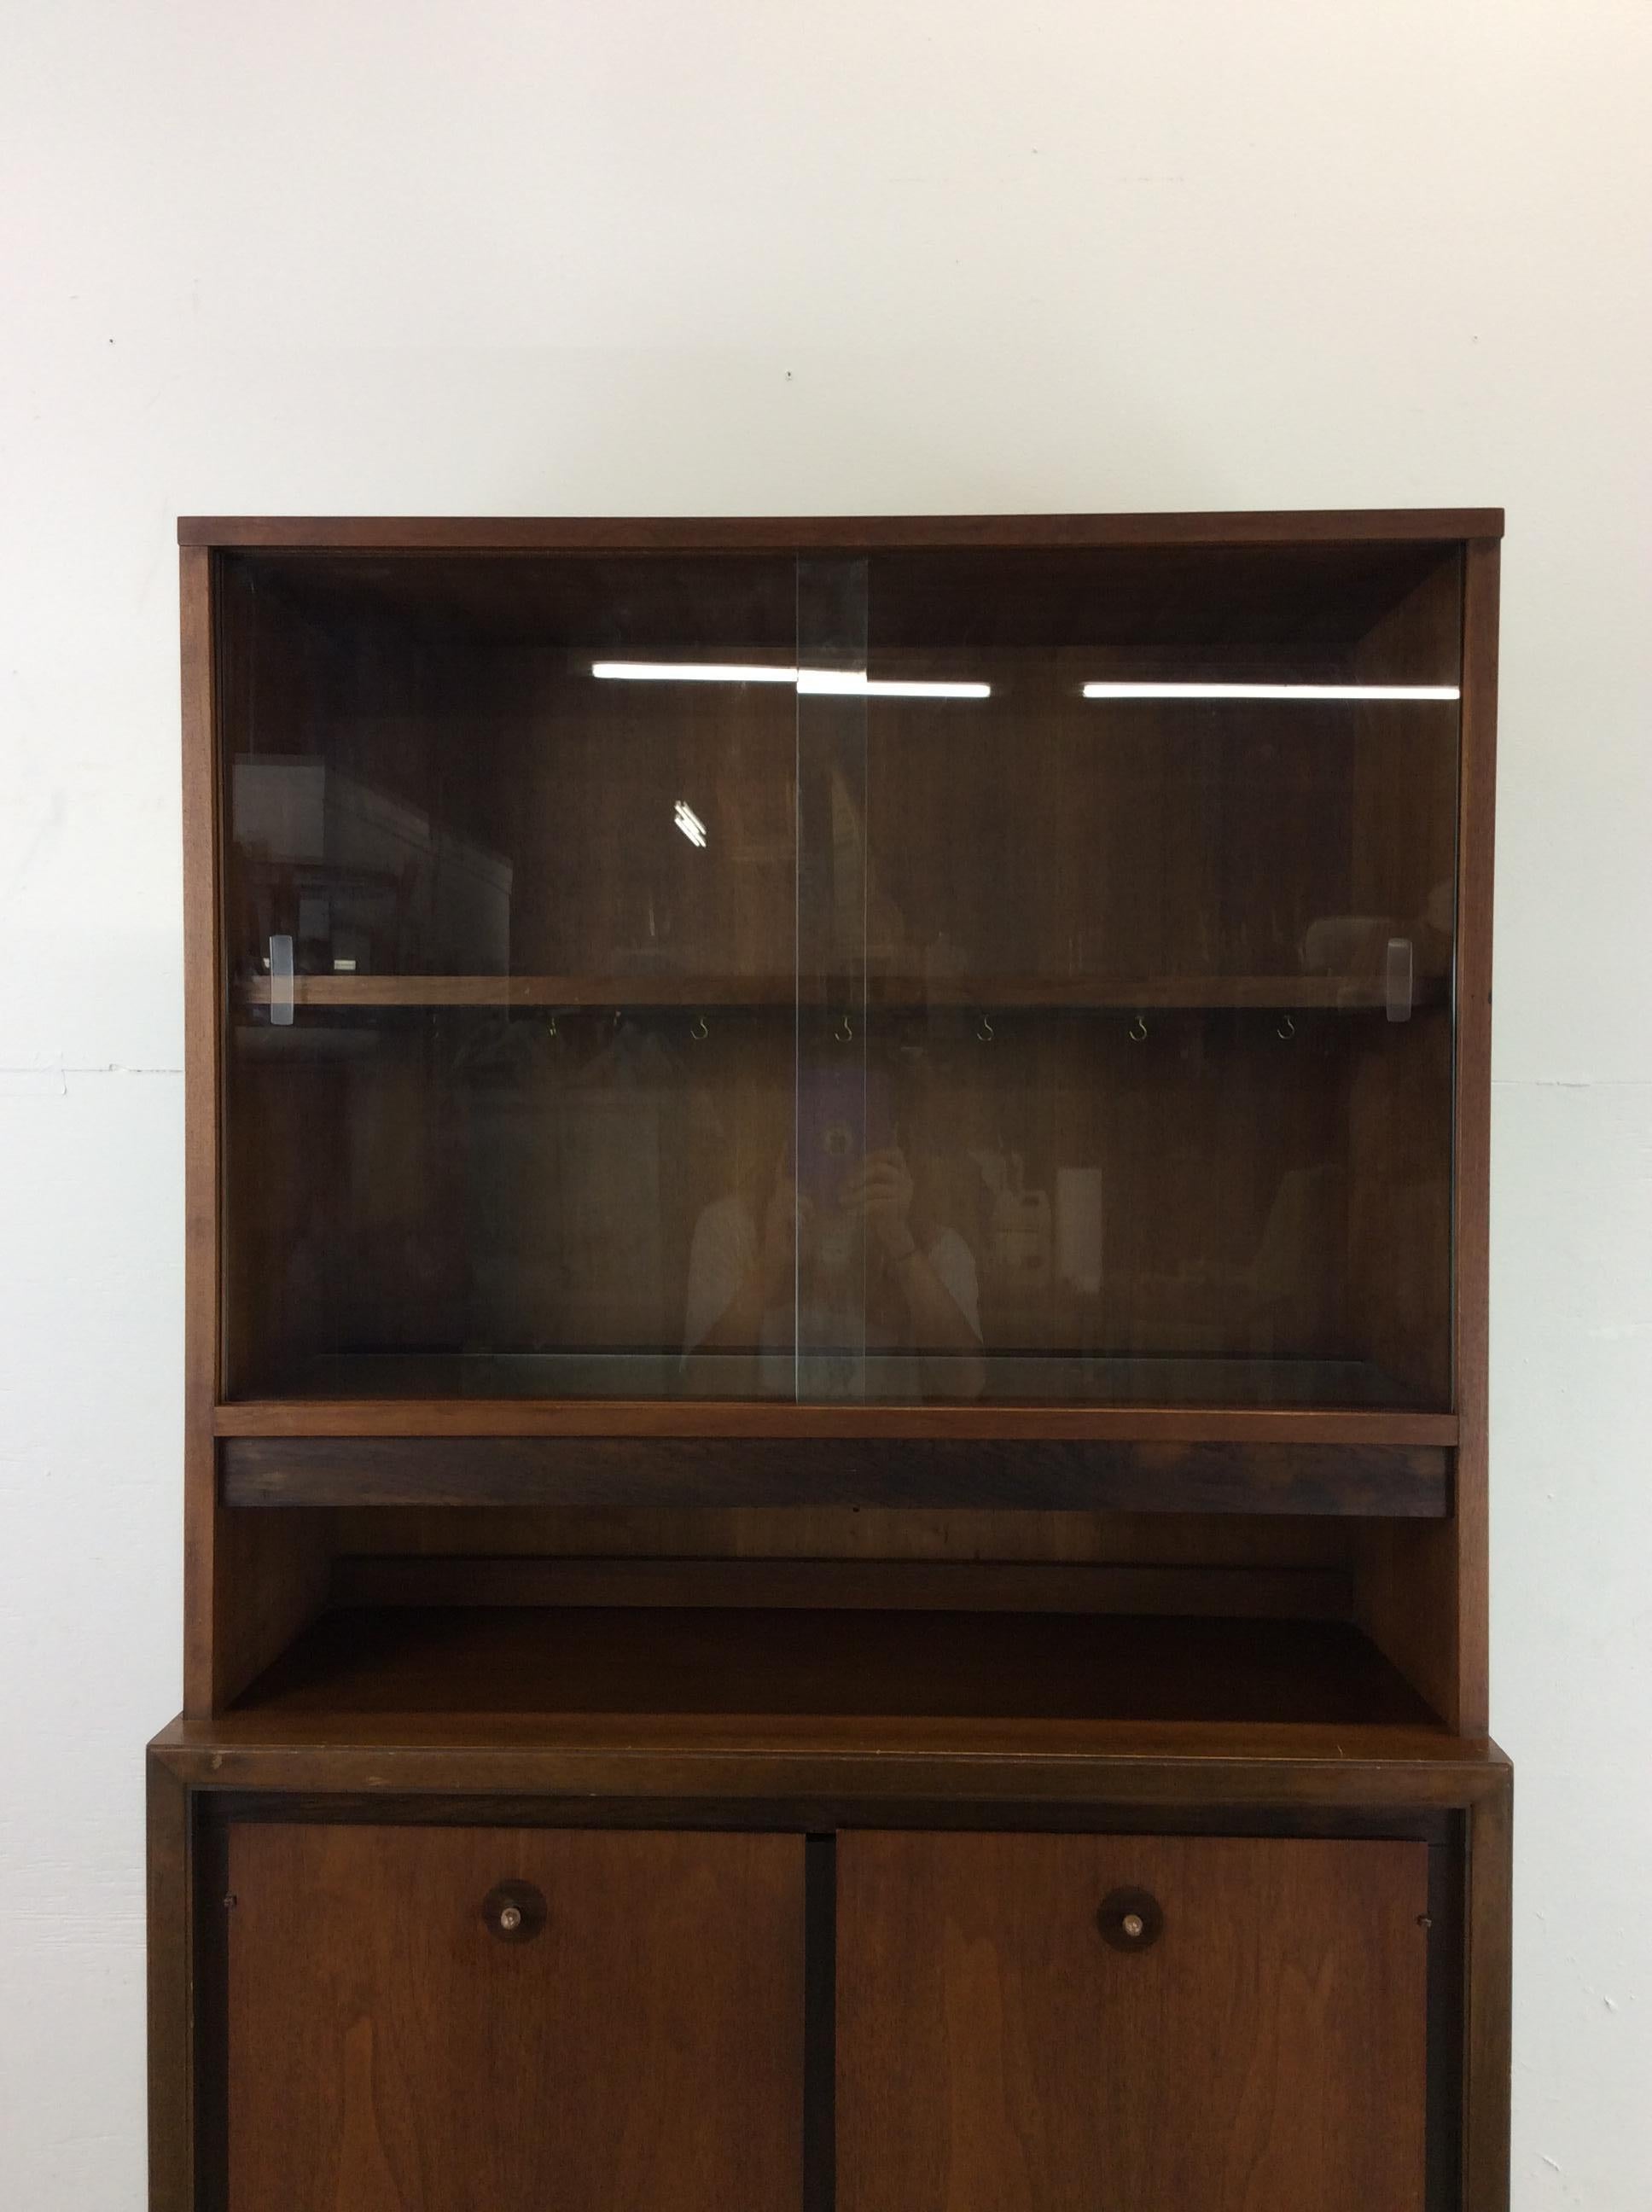 This mid century modern compact china cabinet by Basic-Witz features hardwood construction, original walnut finish, two cabinet doors with brass accented hardware containing a single dovetailed drawer and open storage, sliding glass doors up top